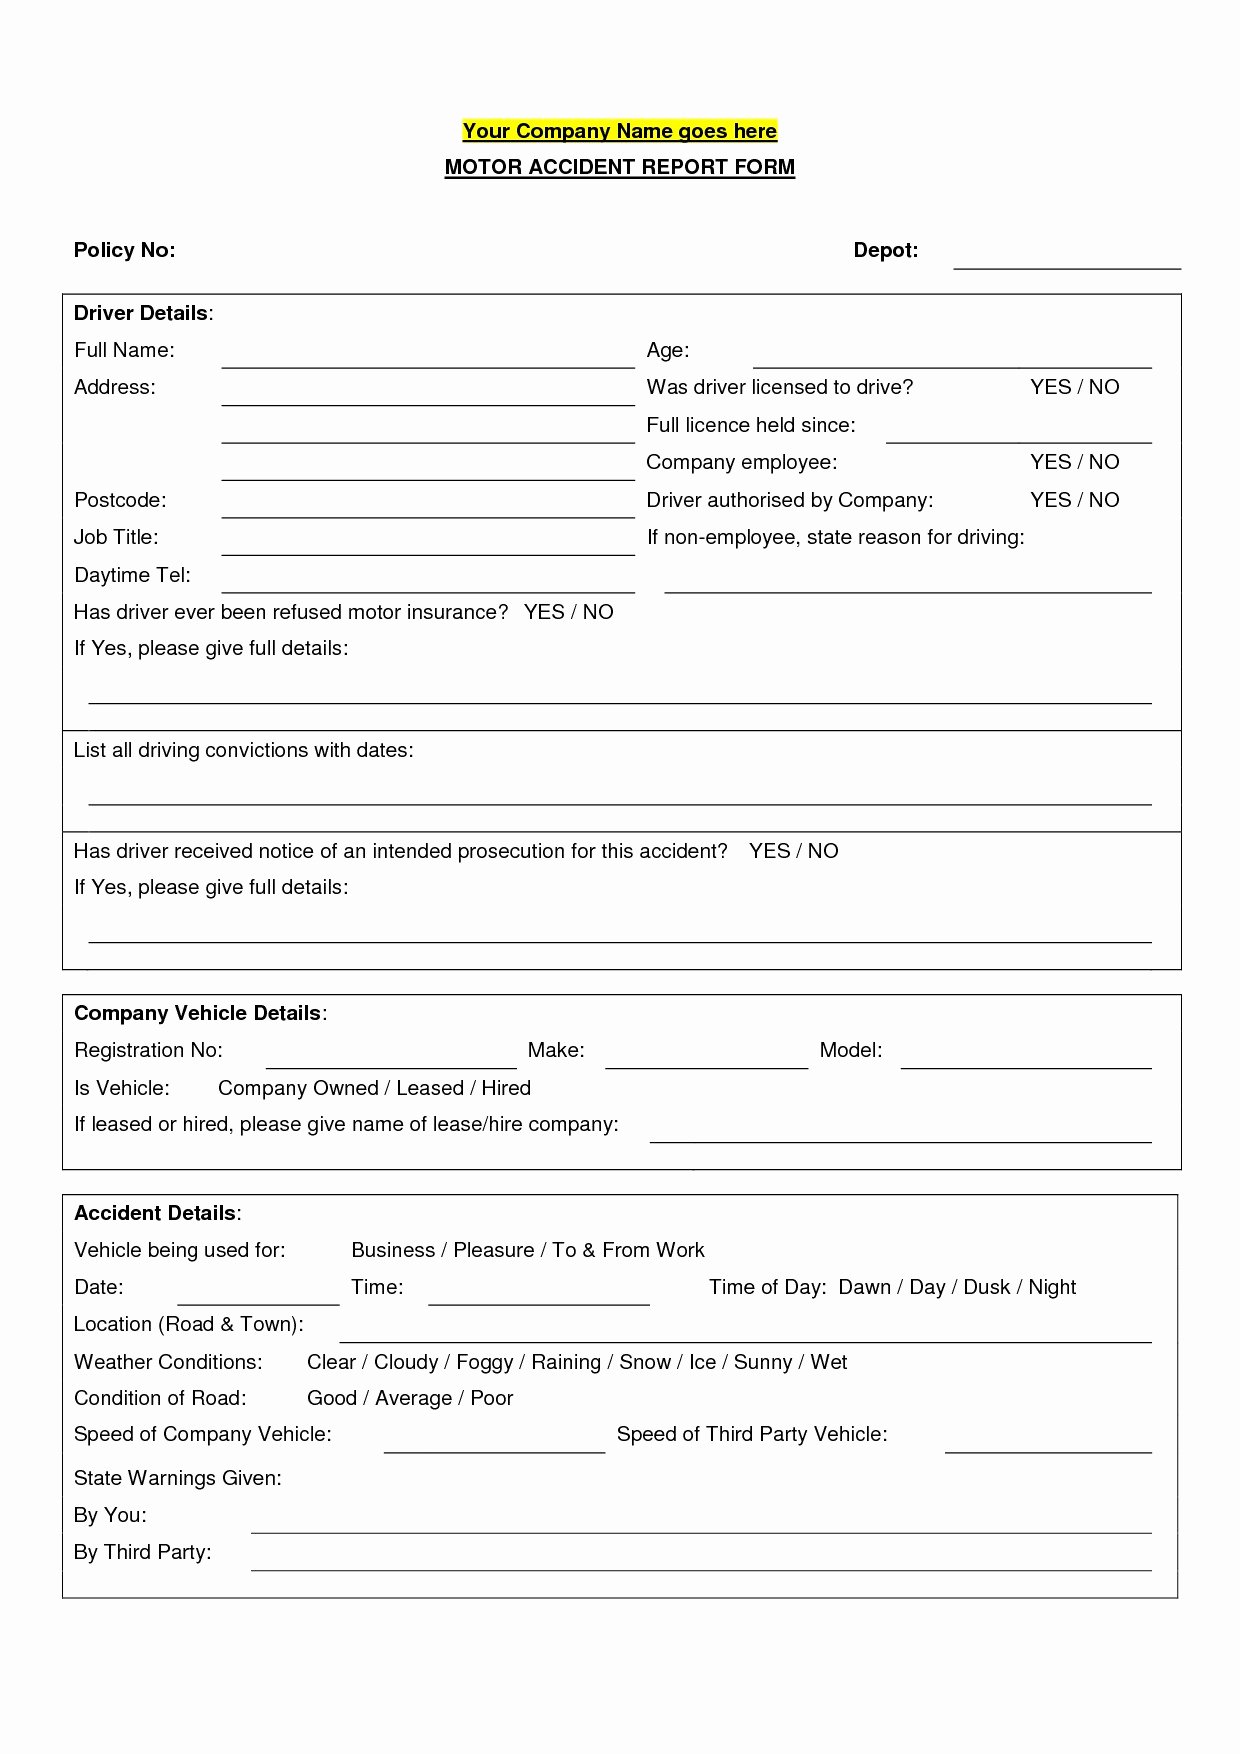 Automobile Accident Report form Template Inspirational Accident Report form Template south Africa 8b9b9d7b0c50